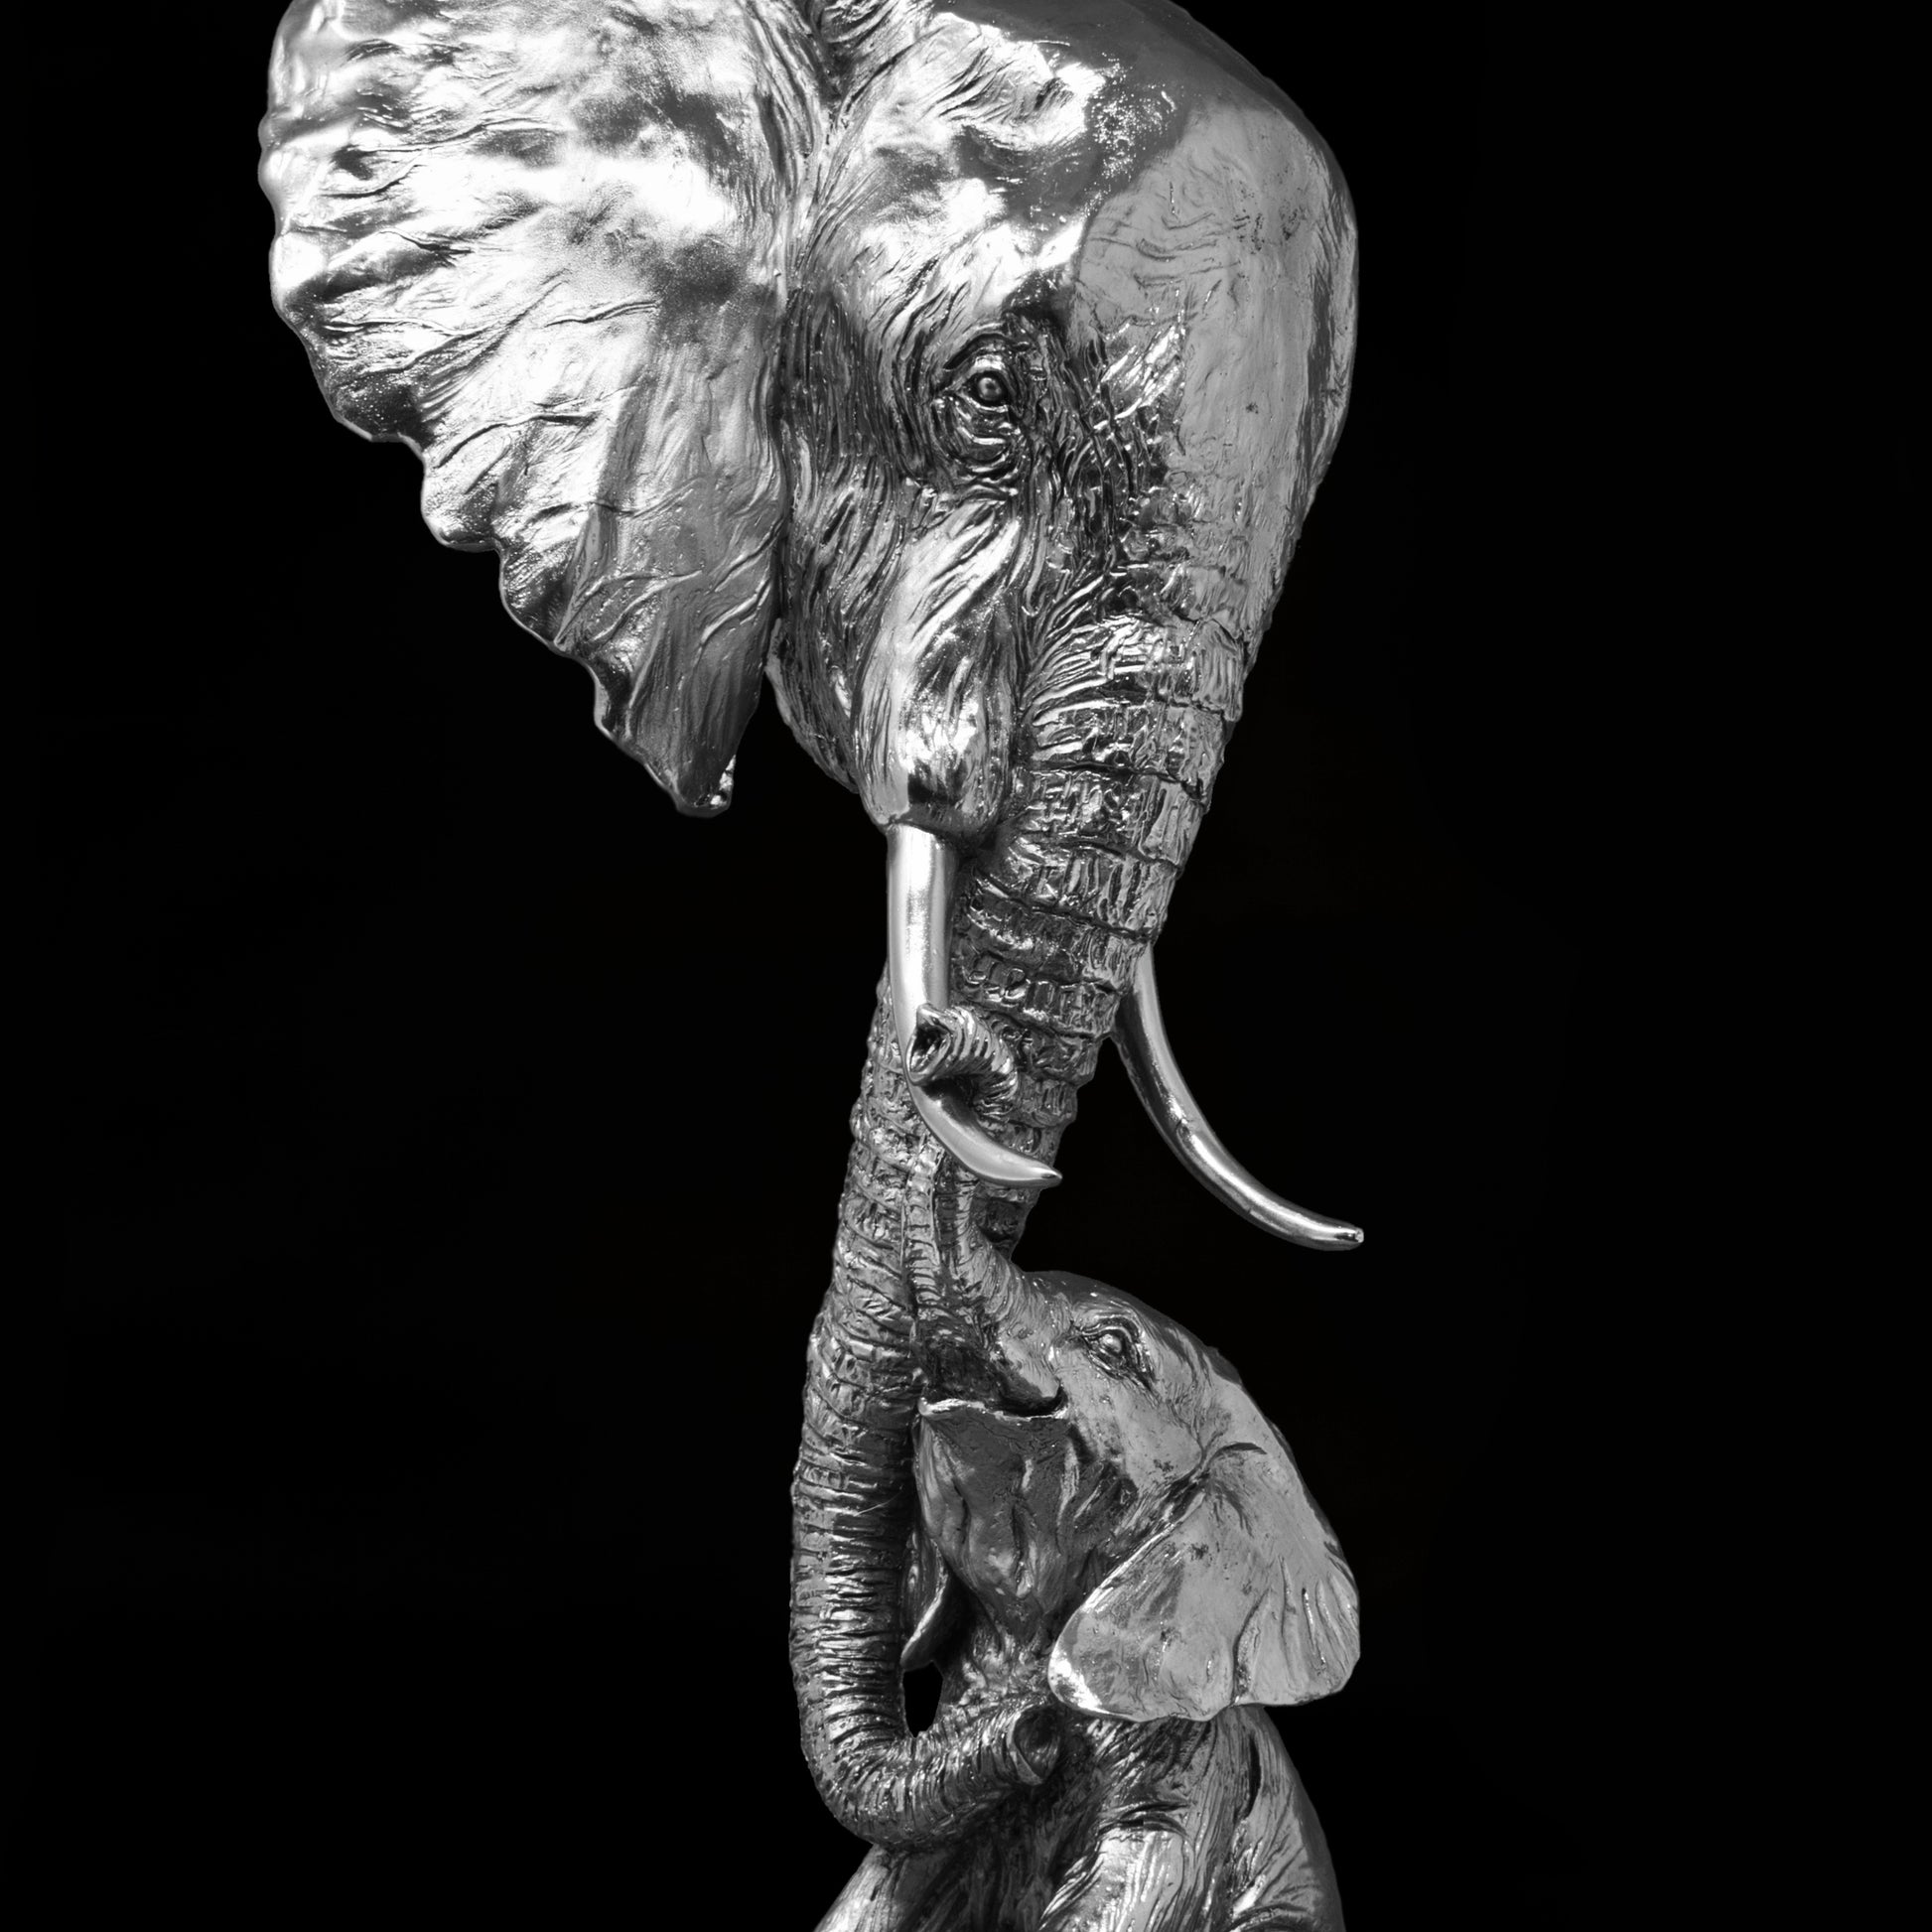 Elephant and Calf from Richard Cooper Studio